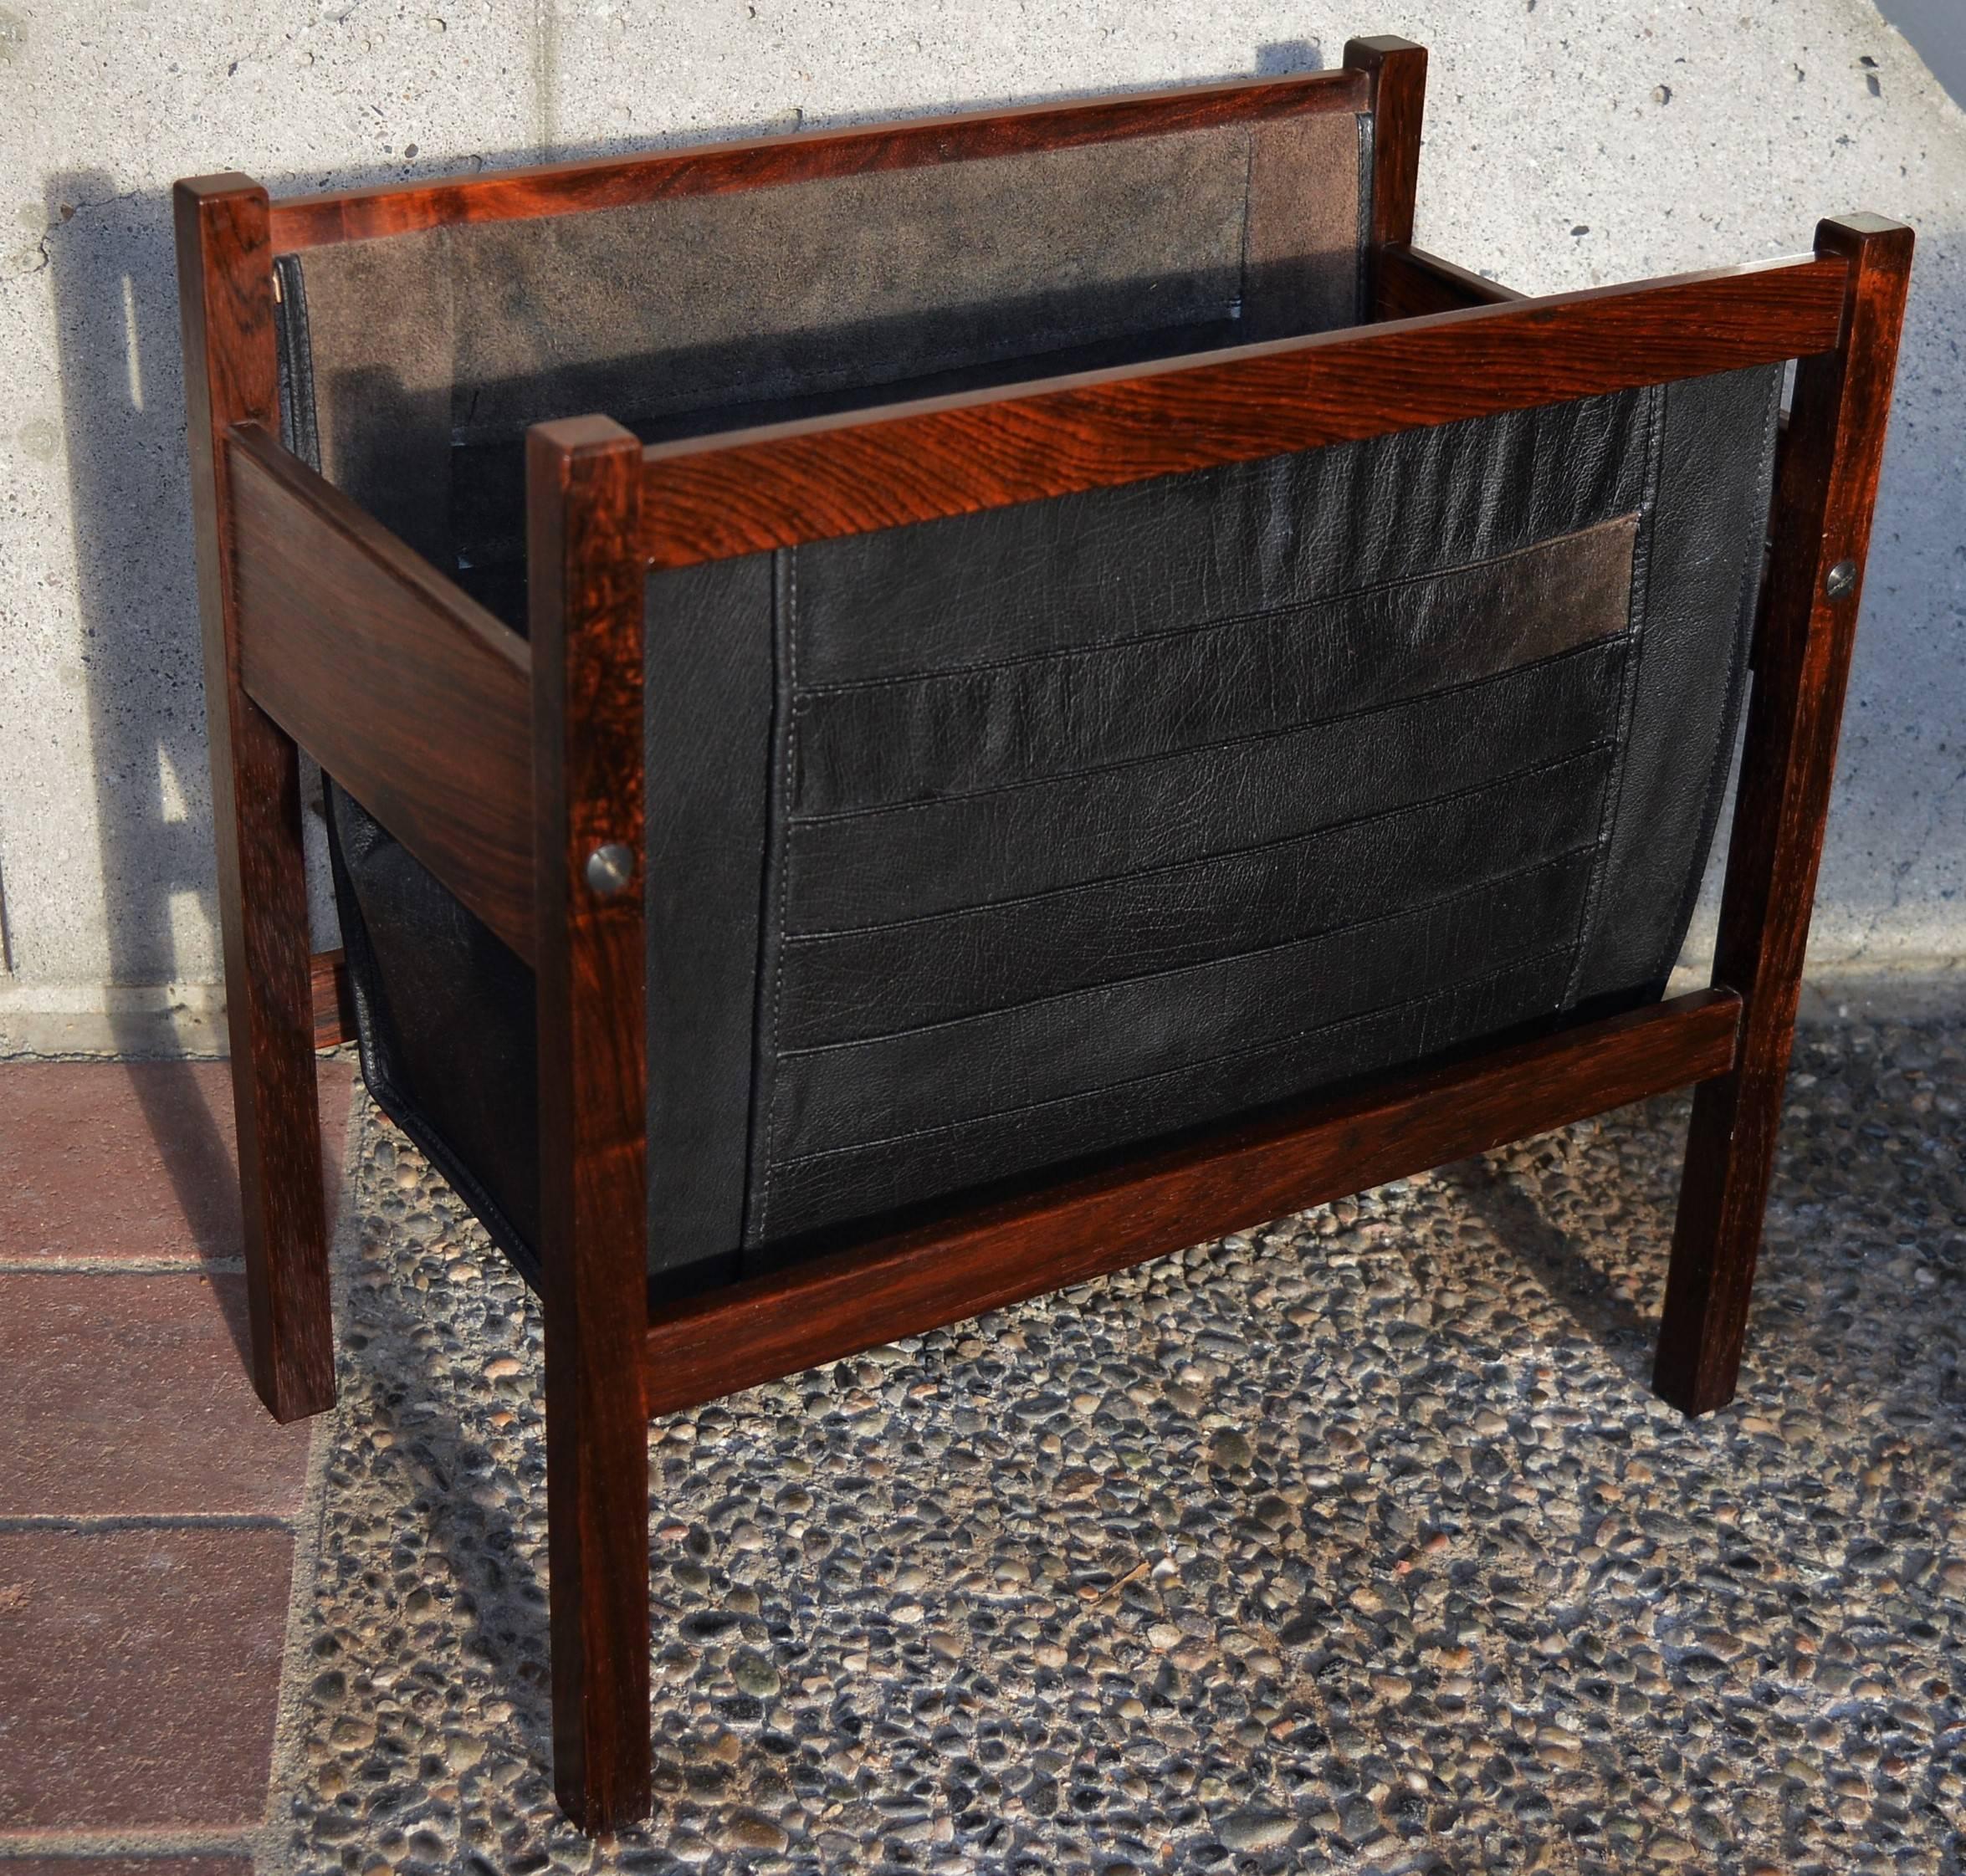 This lovely quality Danish modern rosewood magazine rack has a gorgeous leather double magazine rack with vertically quilted detailing on one side and a rosewood and leather insert. In gorgeous condition and a real looker! The leather is beautiful